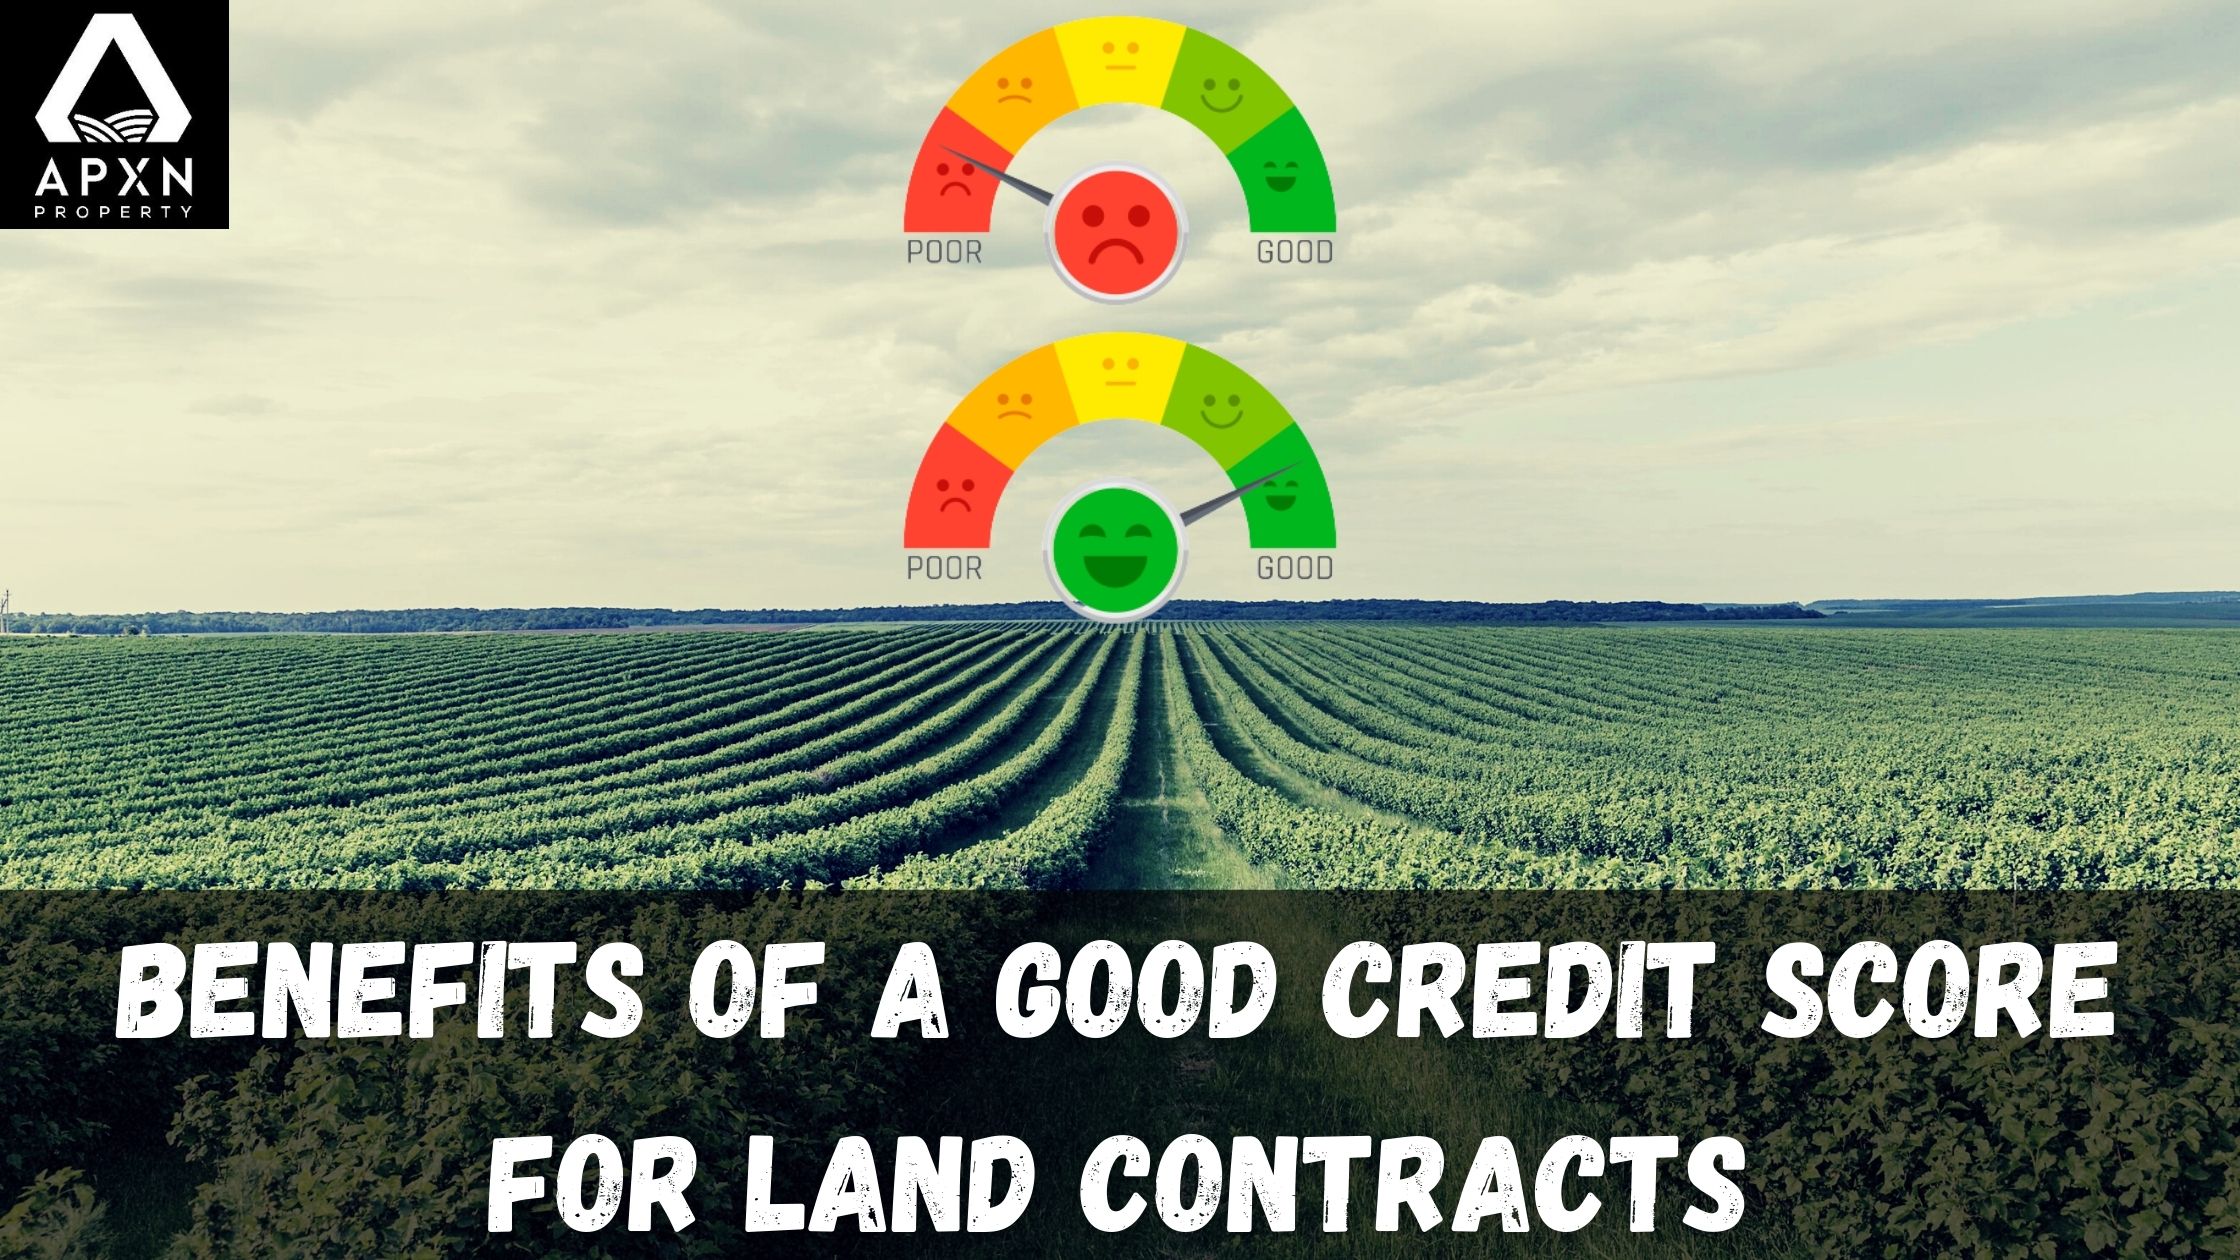 Benefits of Credit Score for Land Contracts